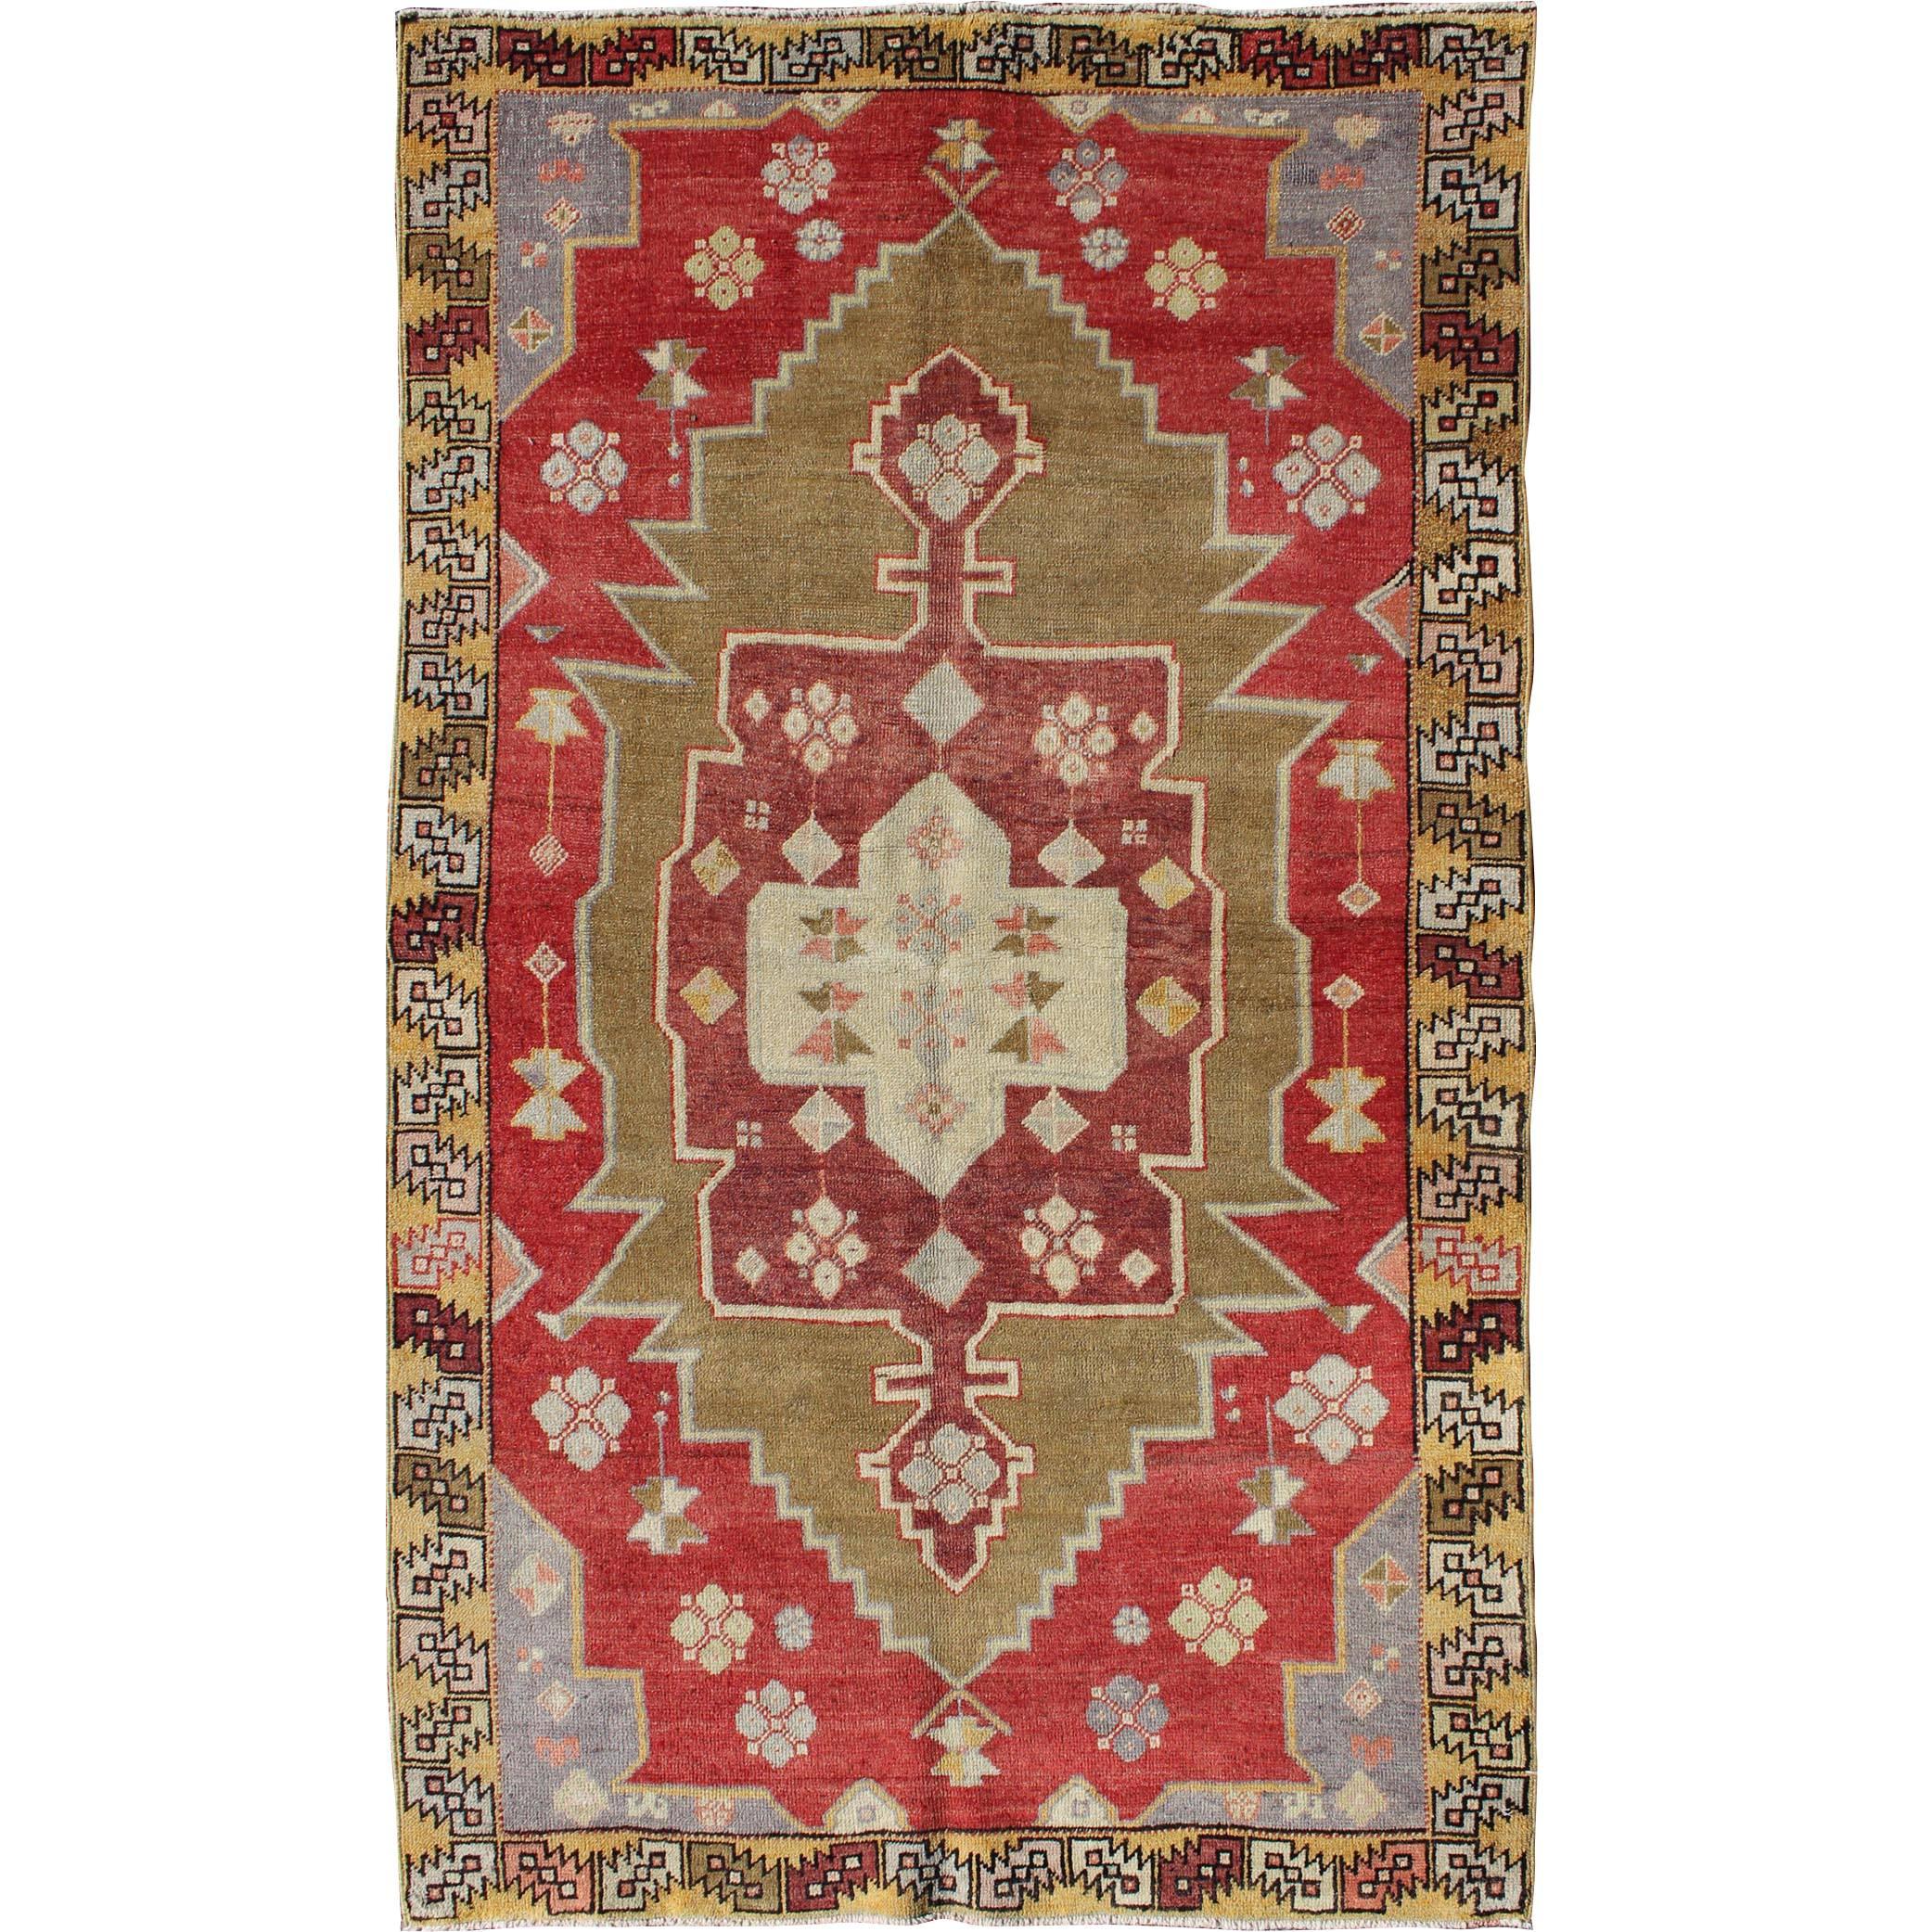 Unique Vintage Turkish Oushak Rug with Geometric Medallion in Red, Green, Yellow